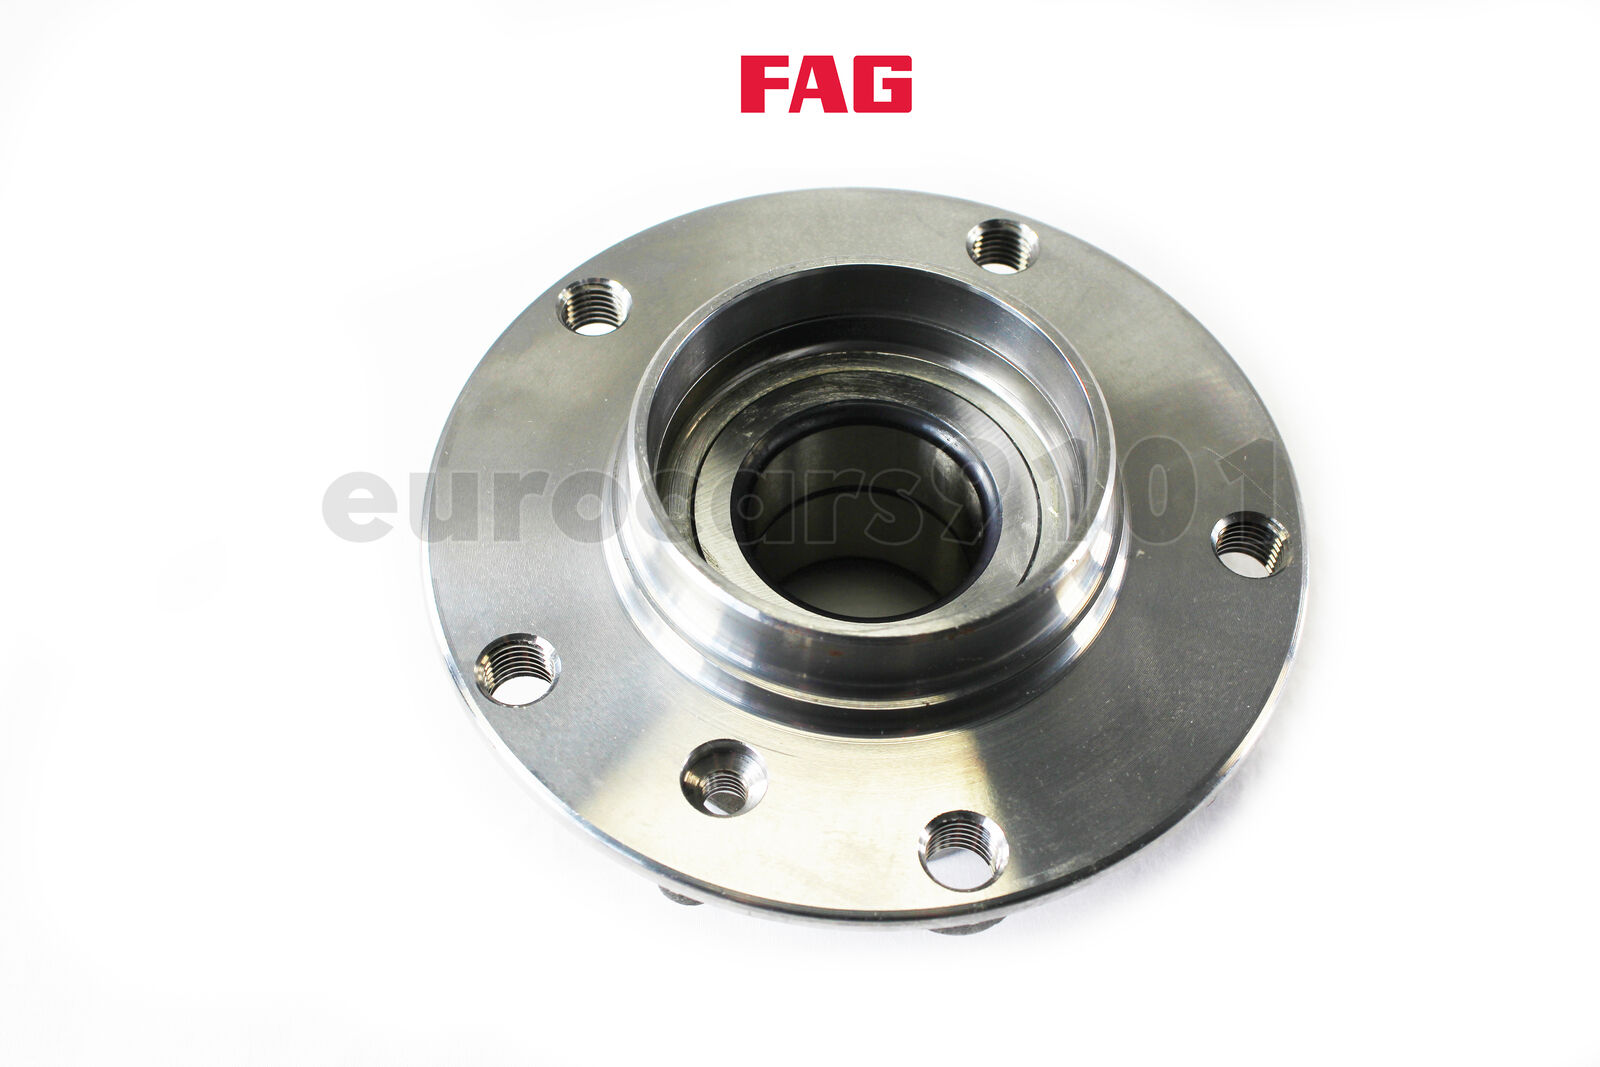 New BMW 750iL FAG Front Wheel Bearing and Hub Assembly 578413A 31221092519